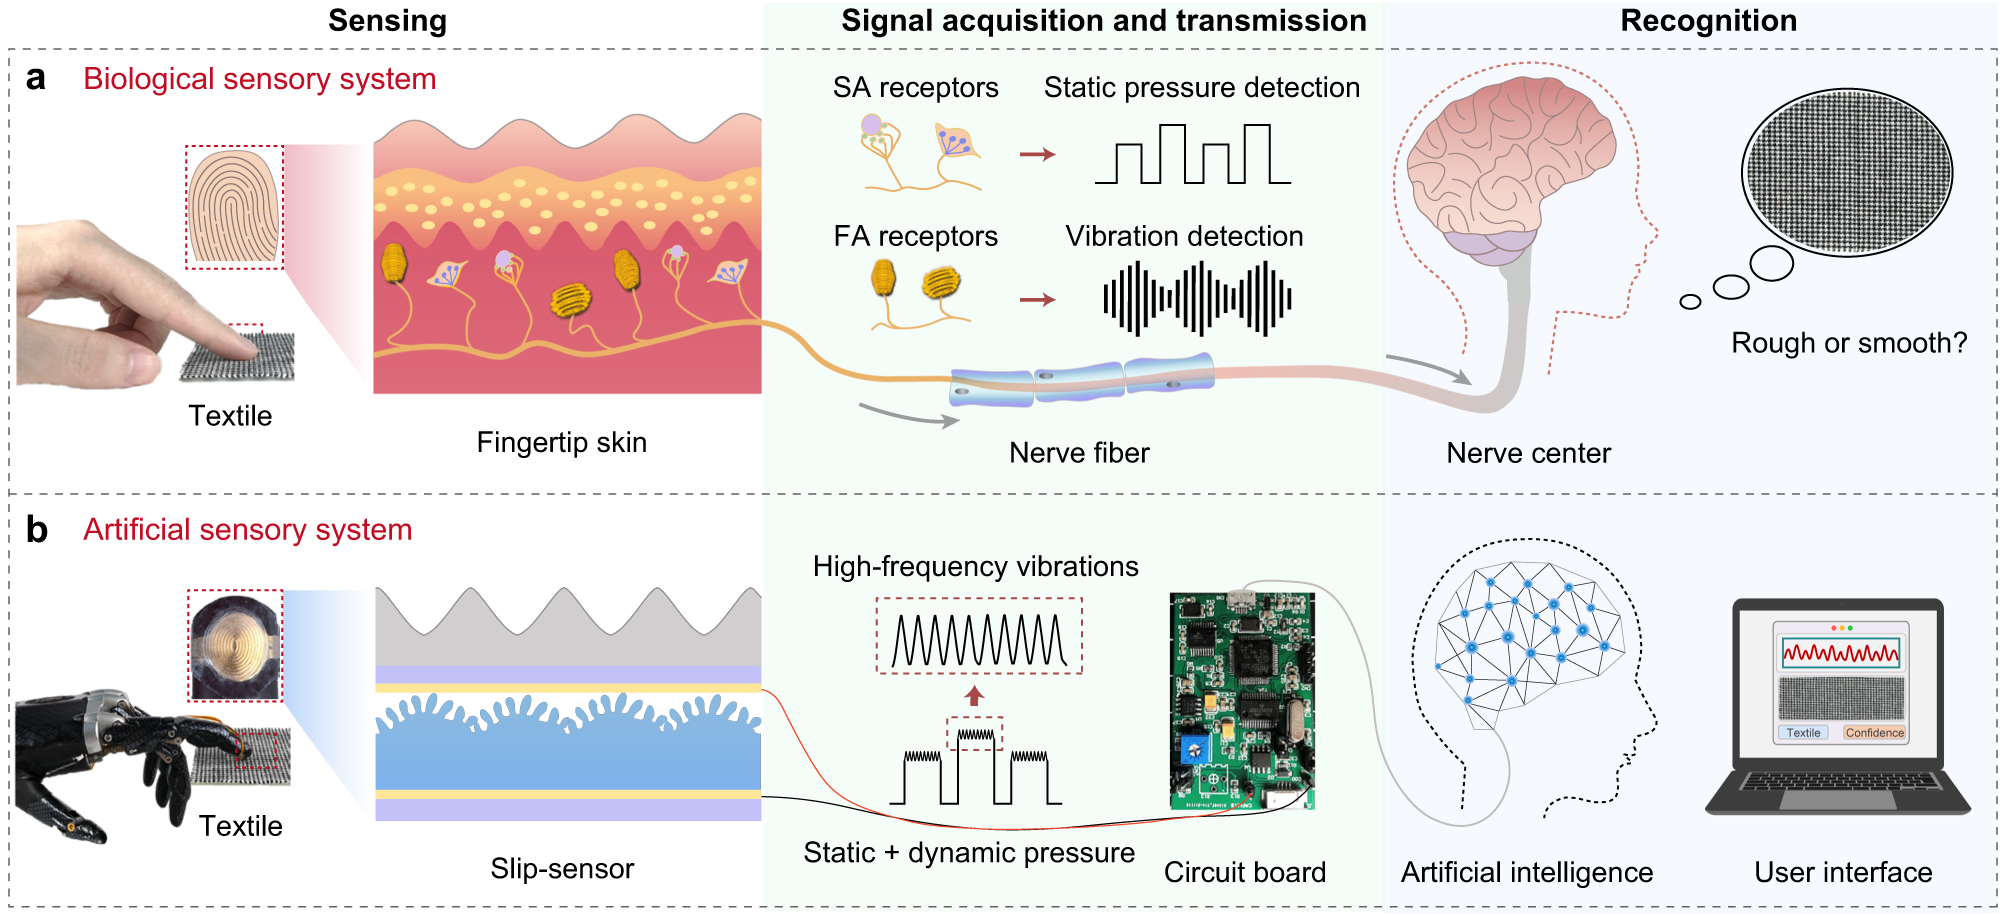 A robotic sensory system with high spatiotemporal resolution for